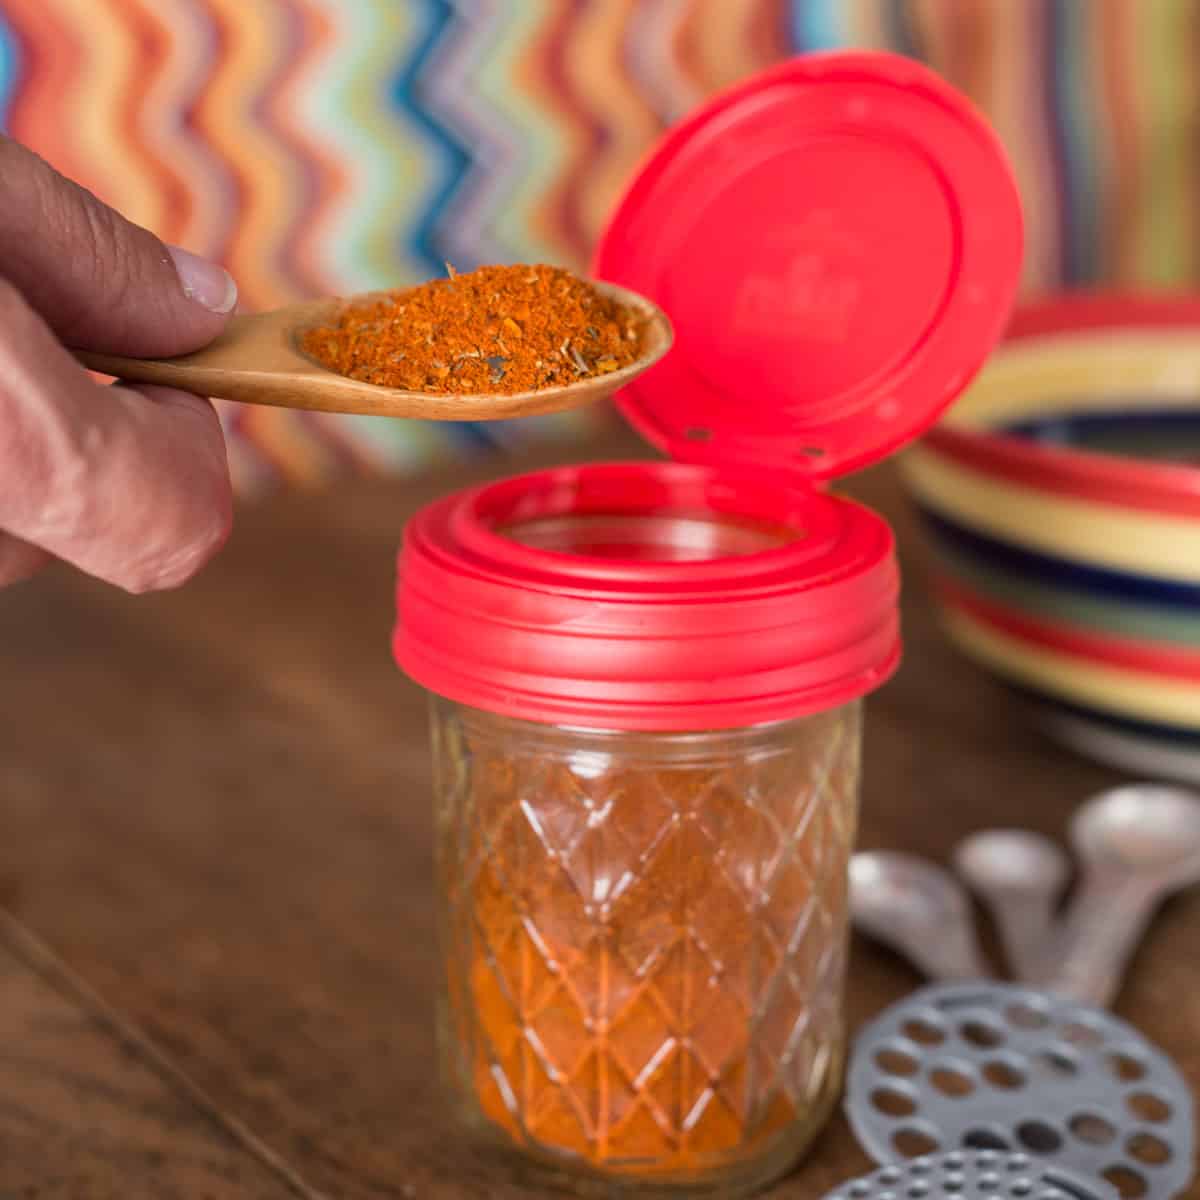 A photo of homemade chili powder on a wooden spoon with a glass jar.